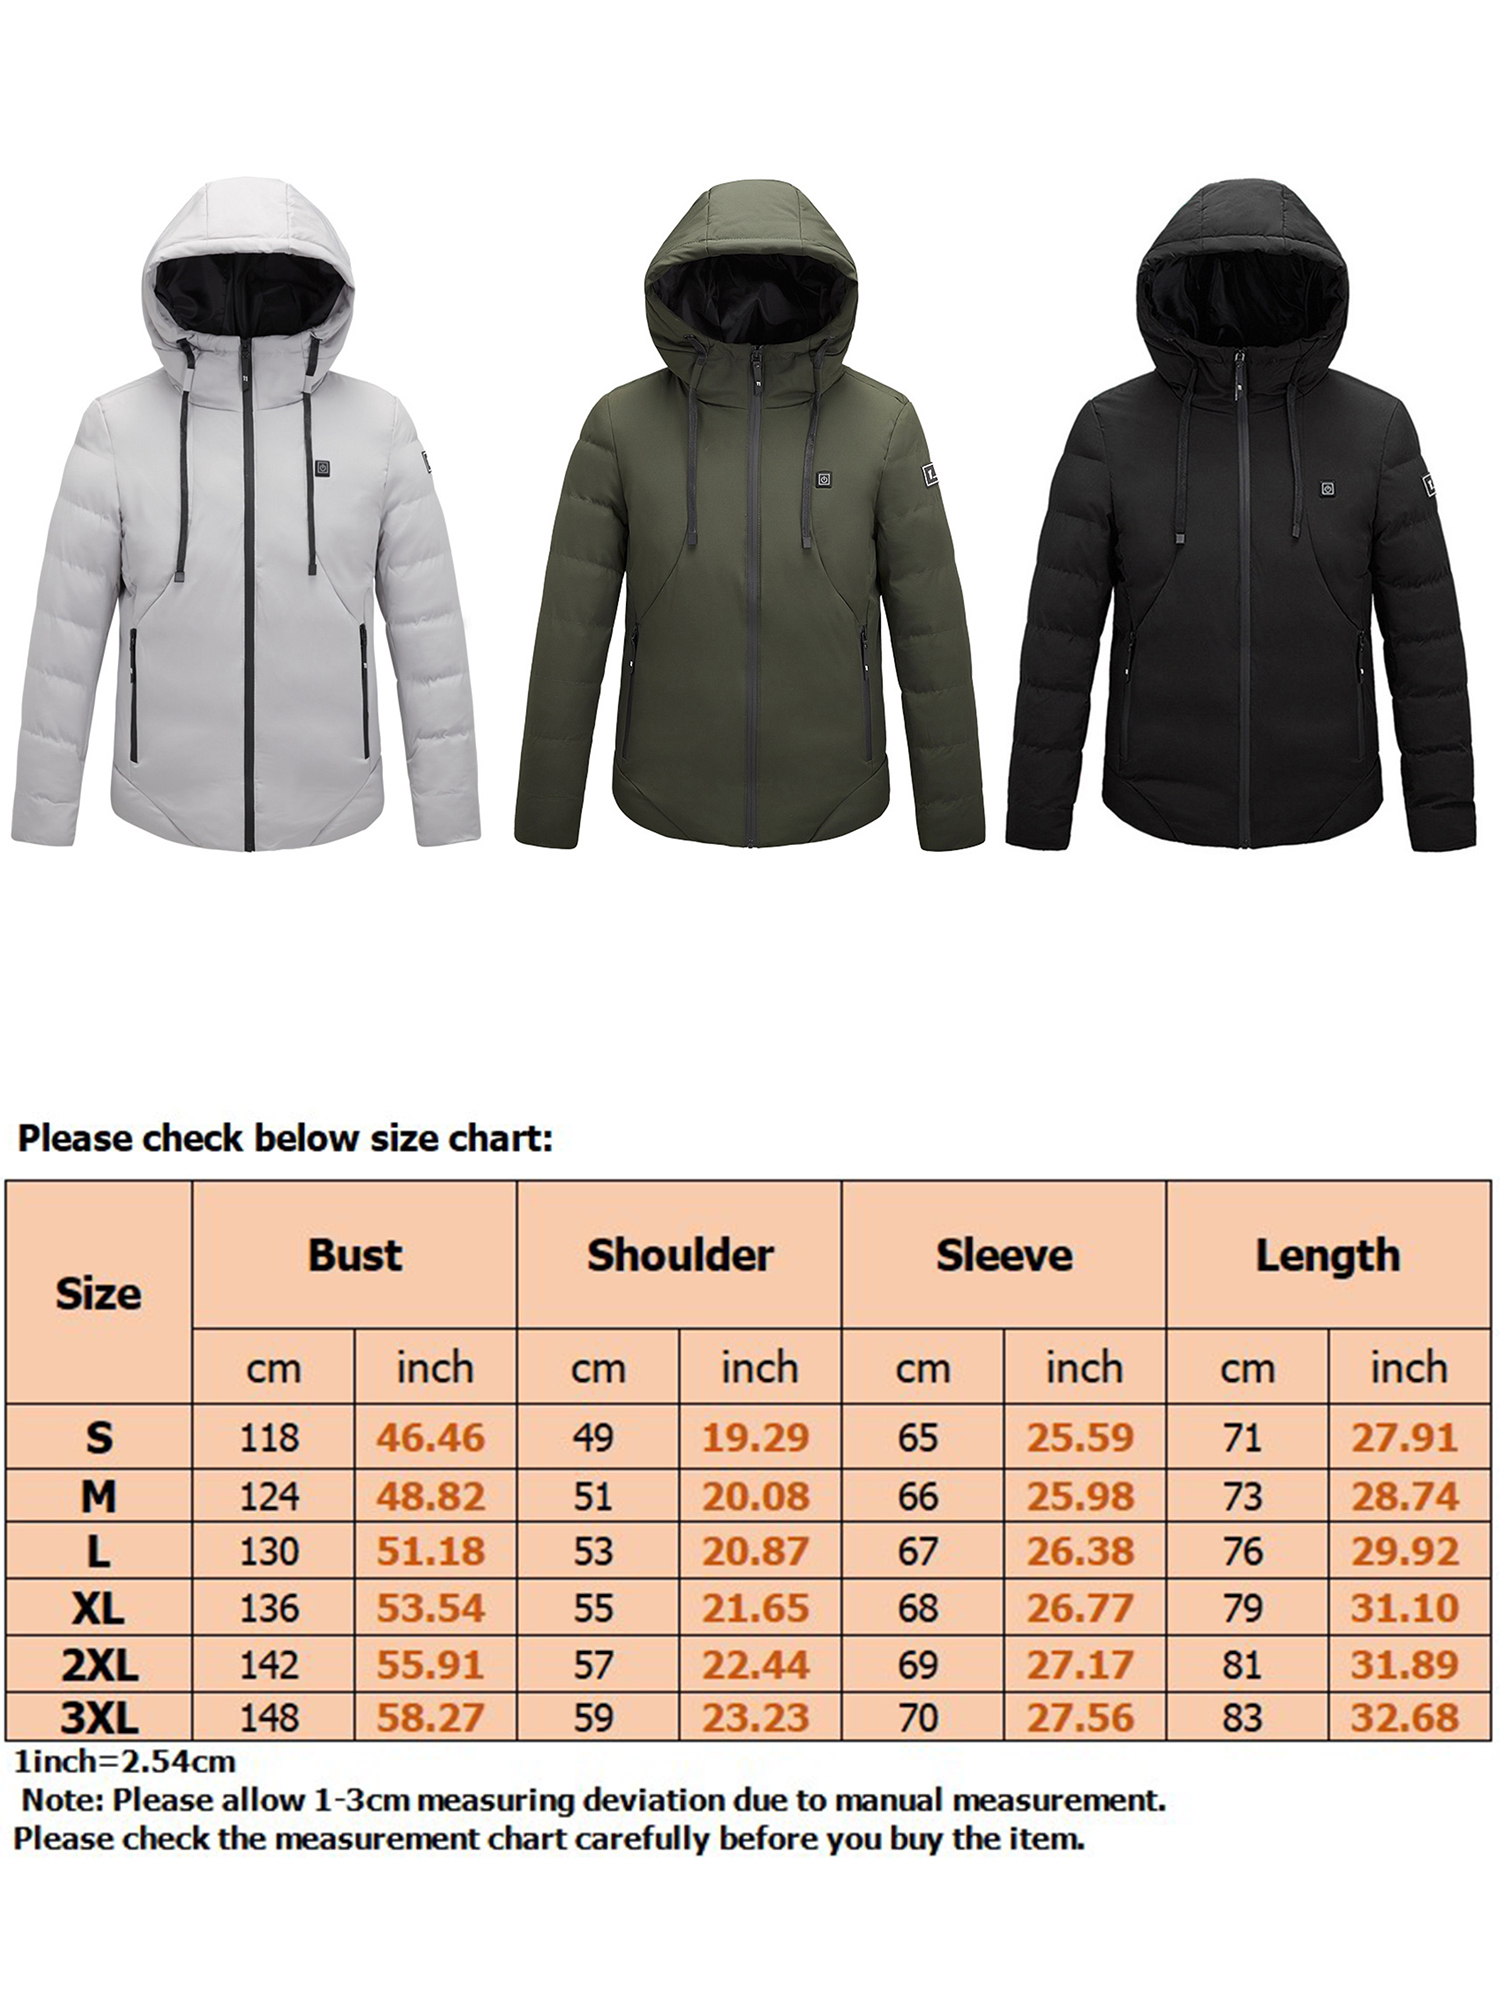 Sexy Dance Men Heated Hooded Jacket Electric Thermal Coat Zipper Down Jackets Outdoor Warmth Outwear with 10000mAh Power Bank - image 2 of 10